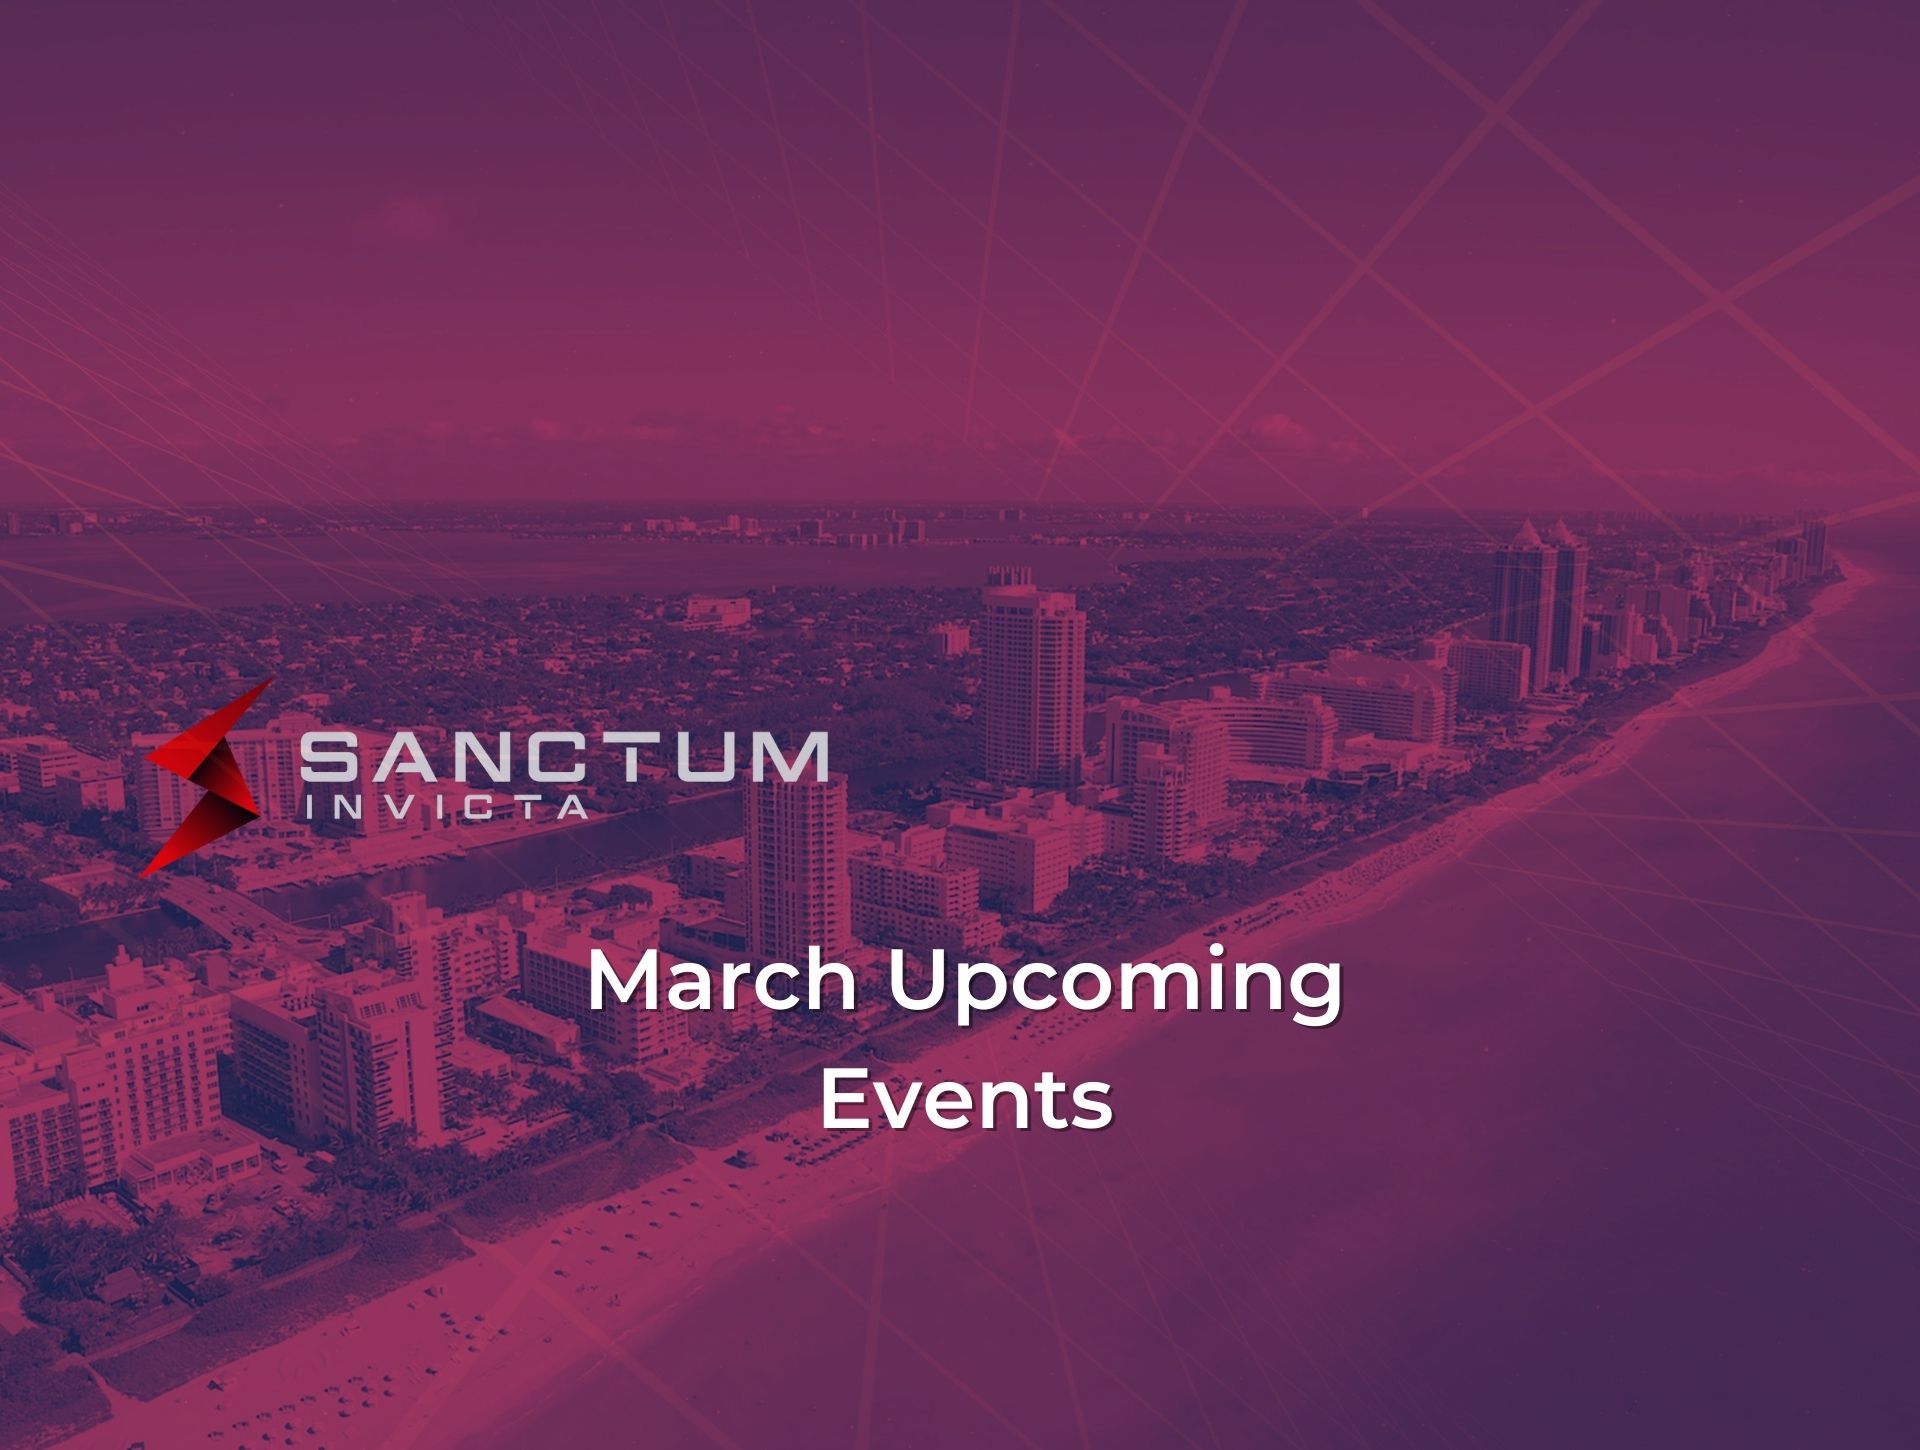 March Upcoming Events